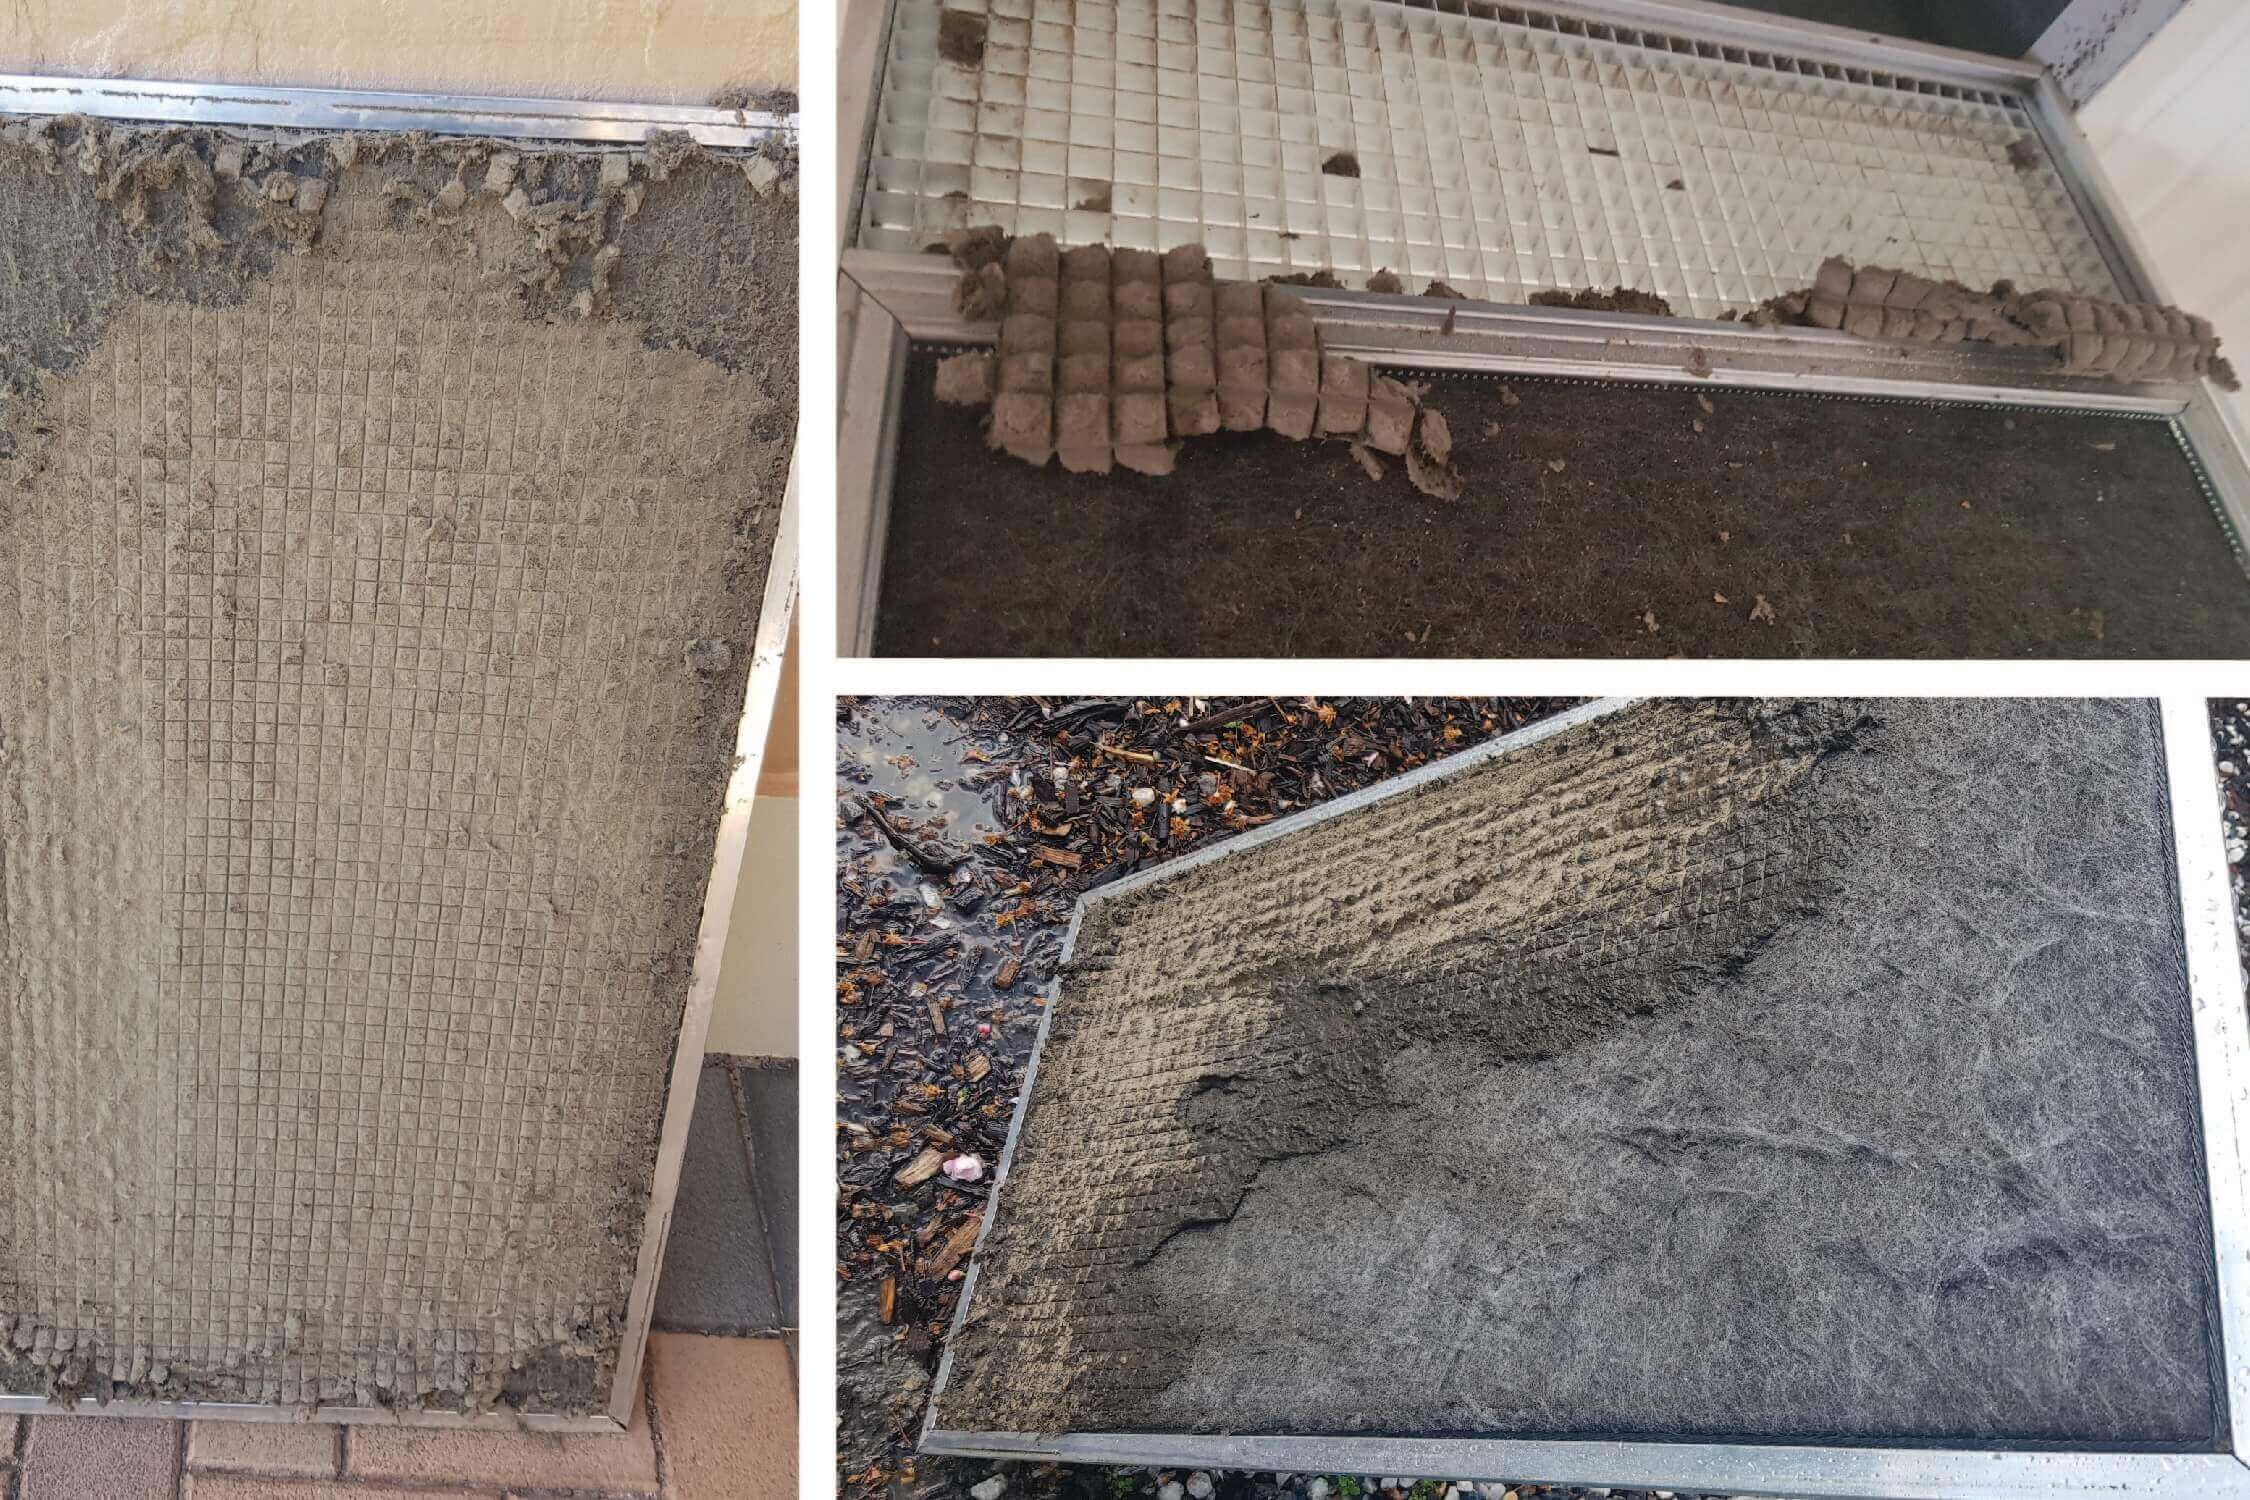 Dig up the dirt on Airconditioner